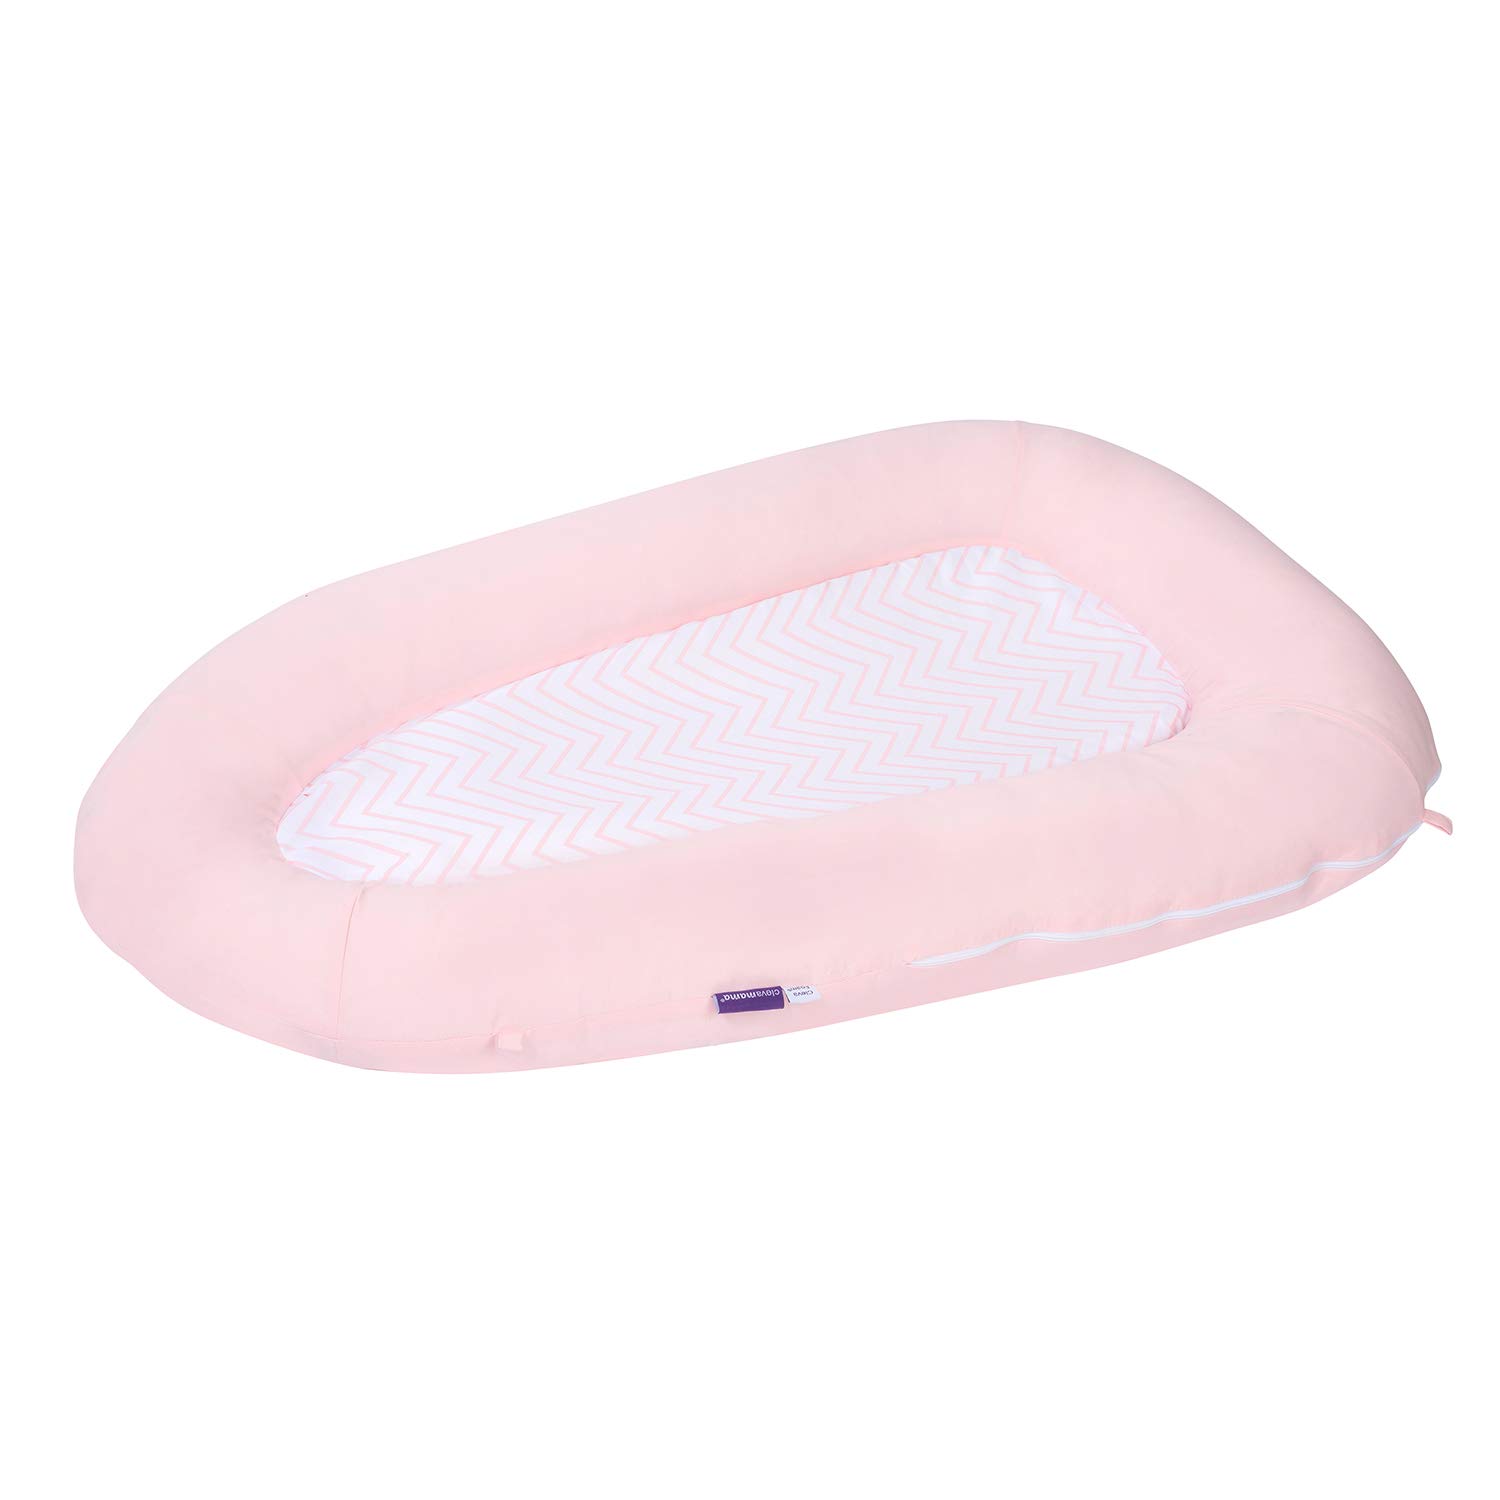 Clevamama Clevafoam Breathable Baby Cot Nest for Newborn and Babies (0-6 Months) - Pink